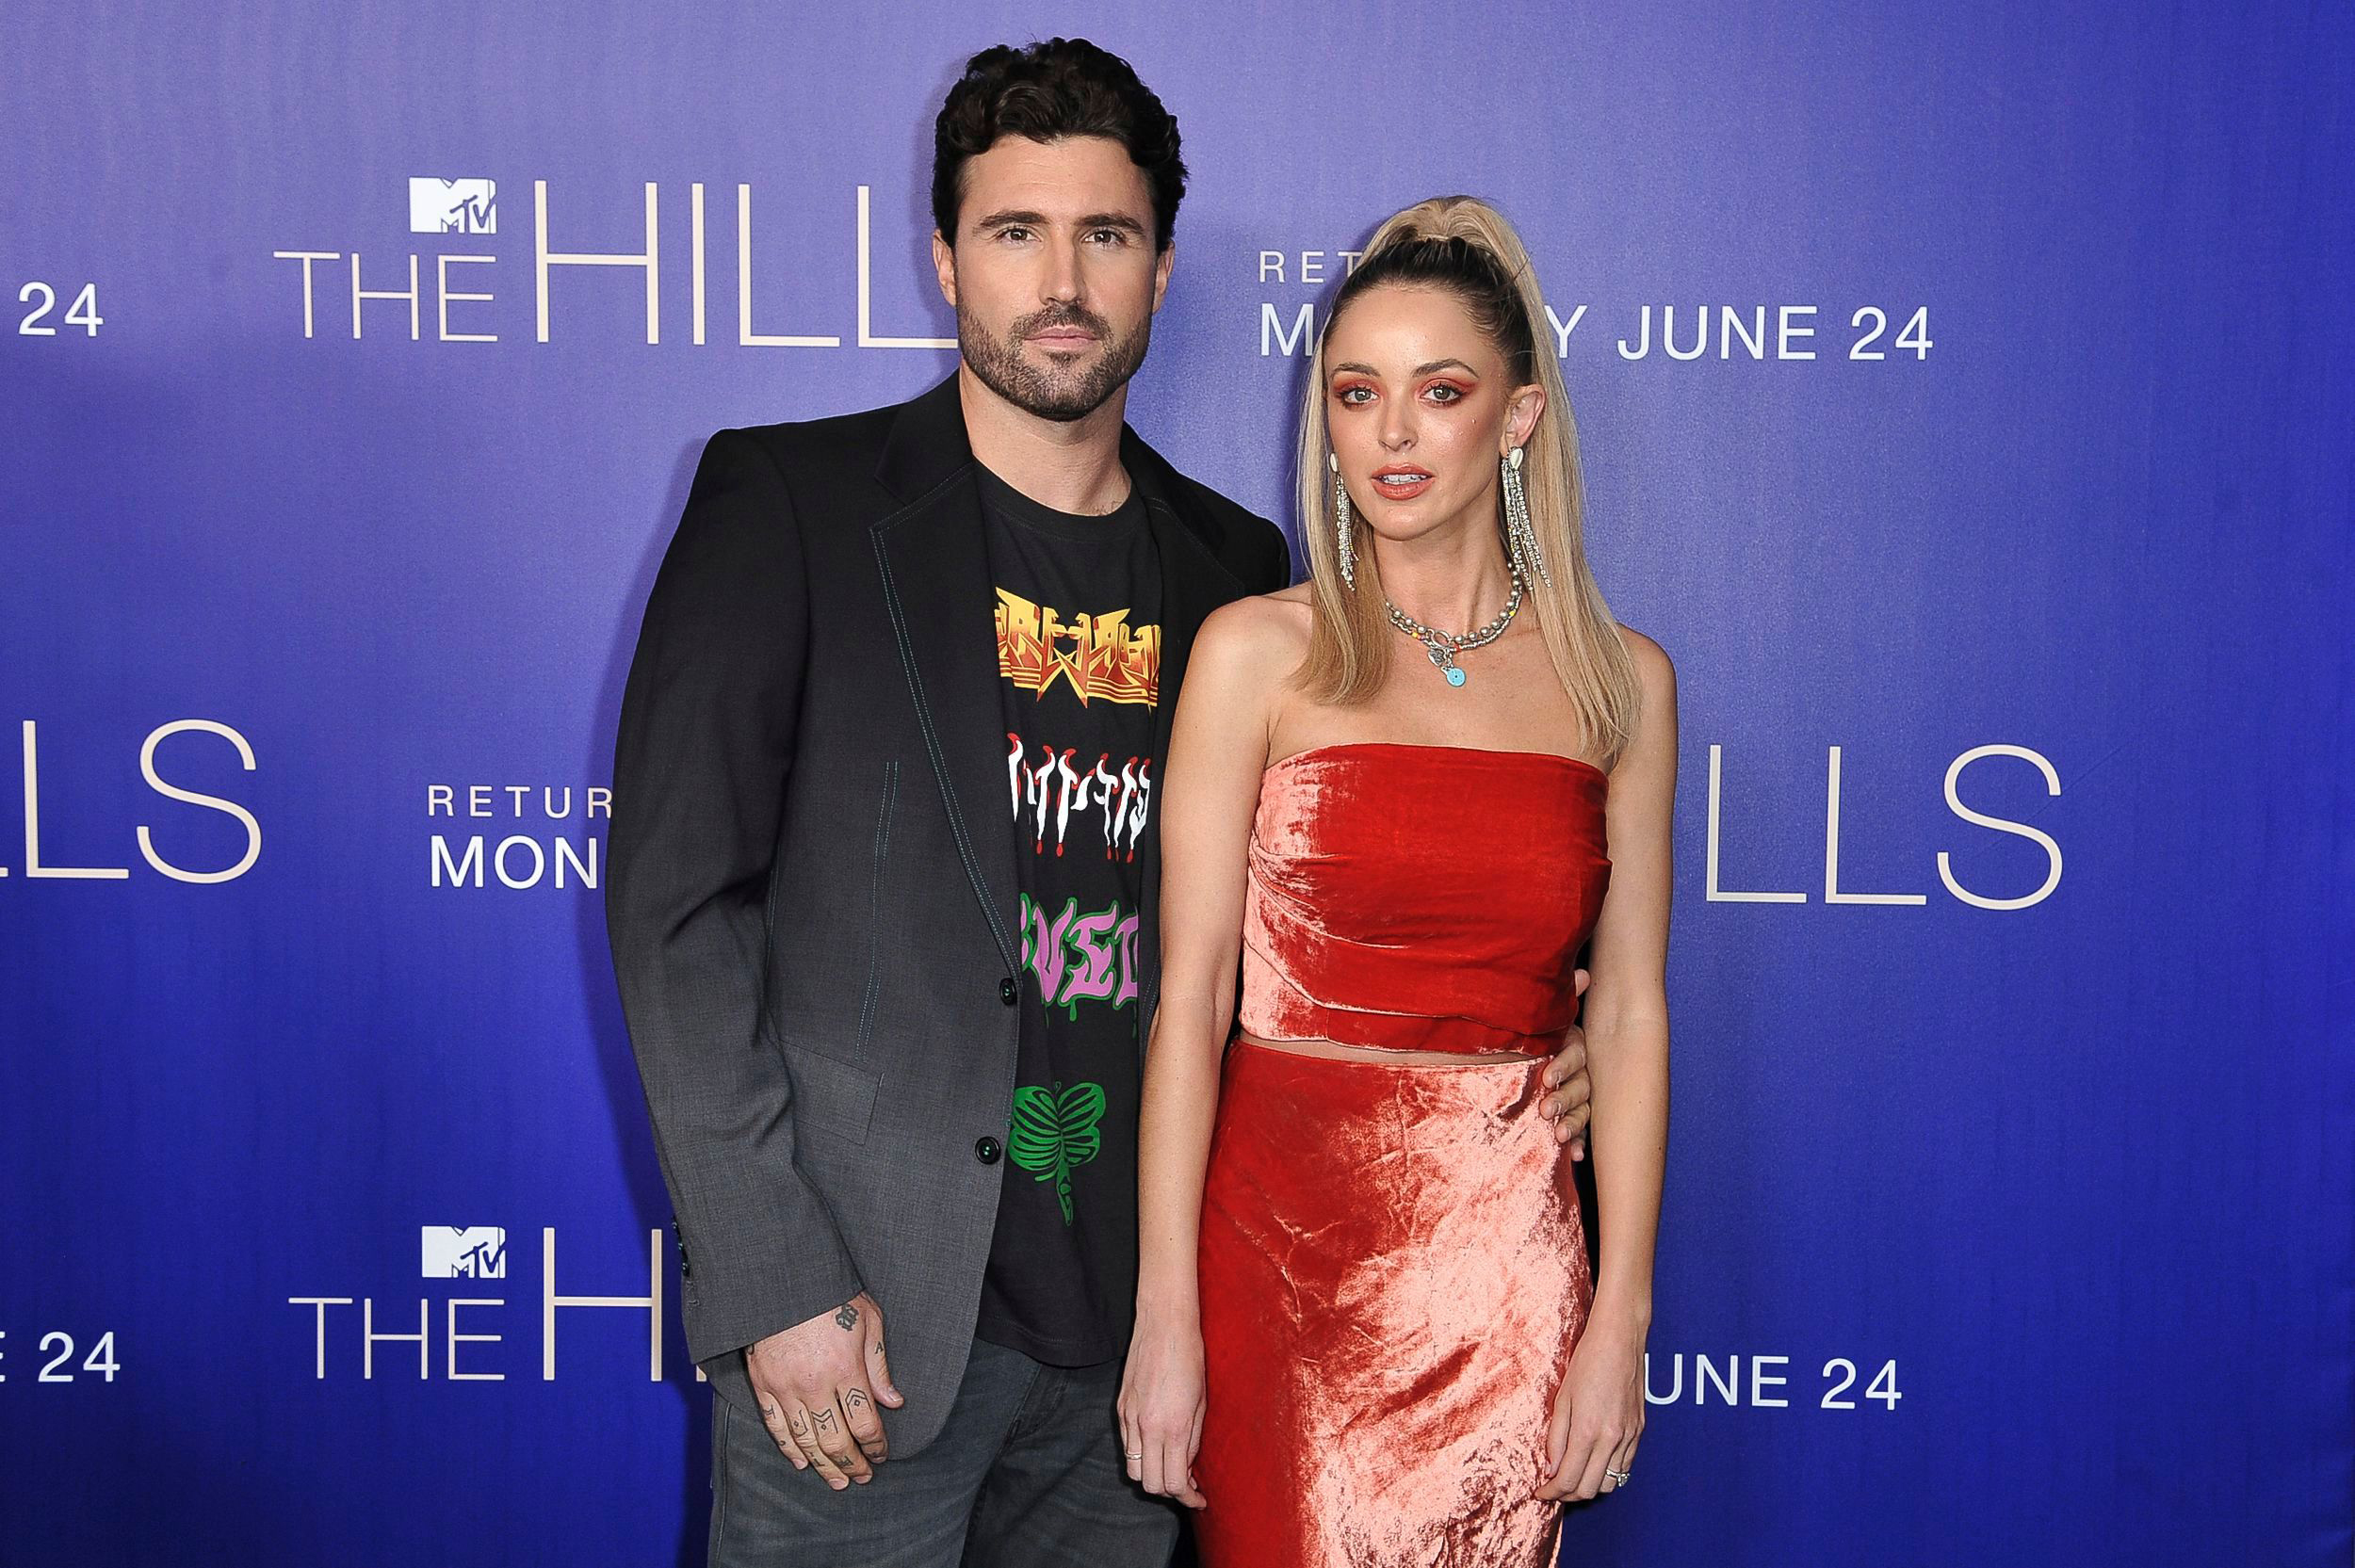 The Hills': Kaitlynn Carter Responds to Brody Jenner Reunion Hate